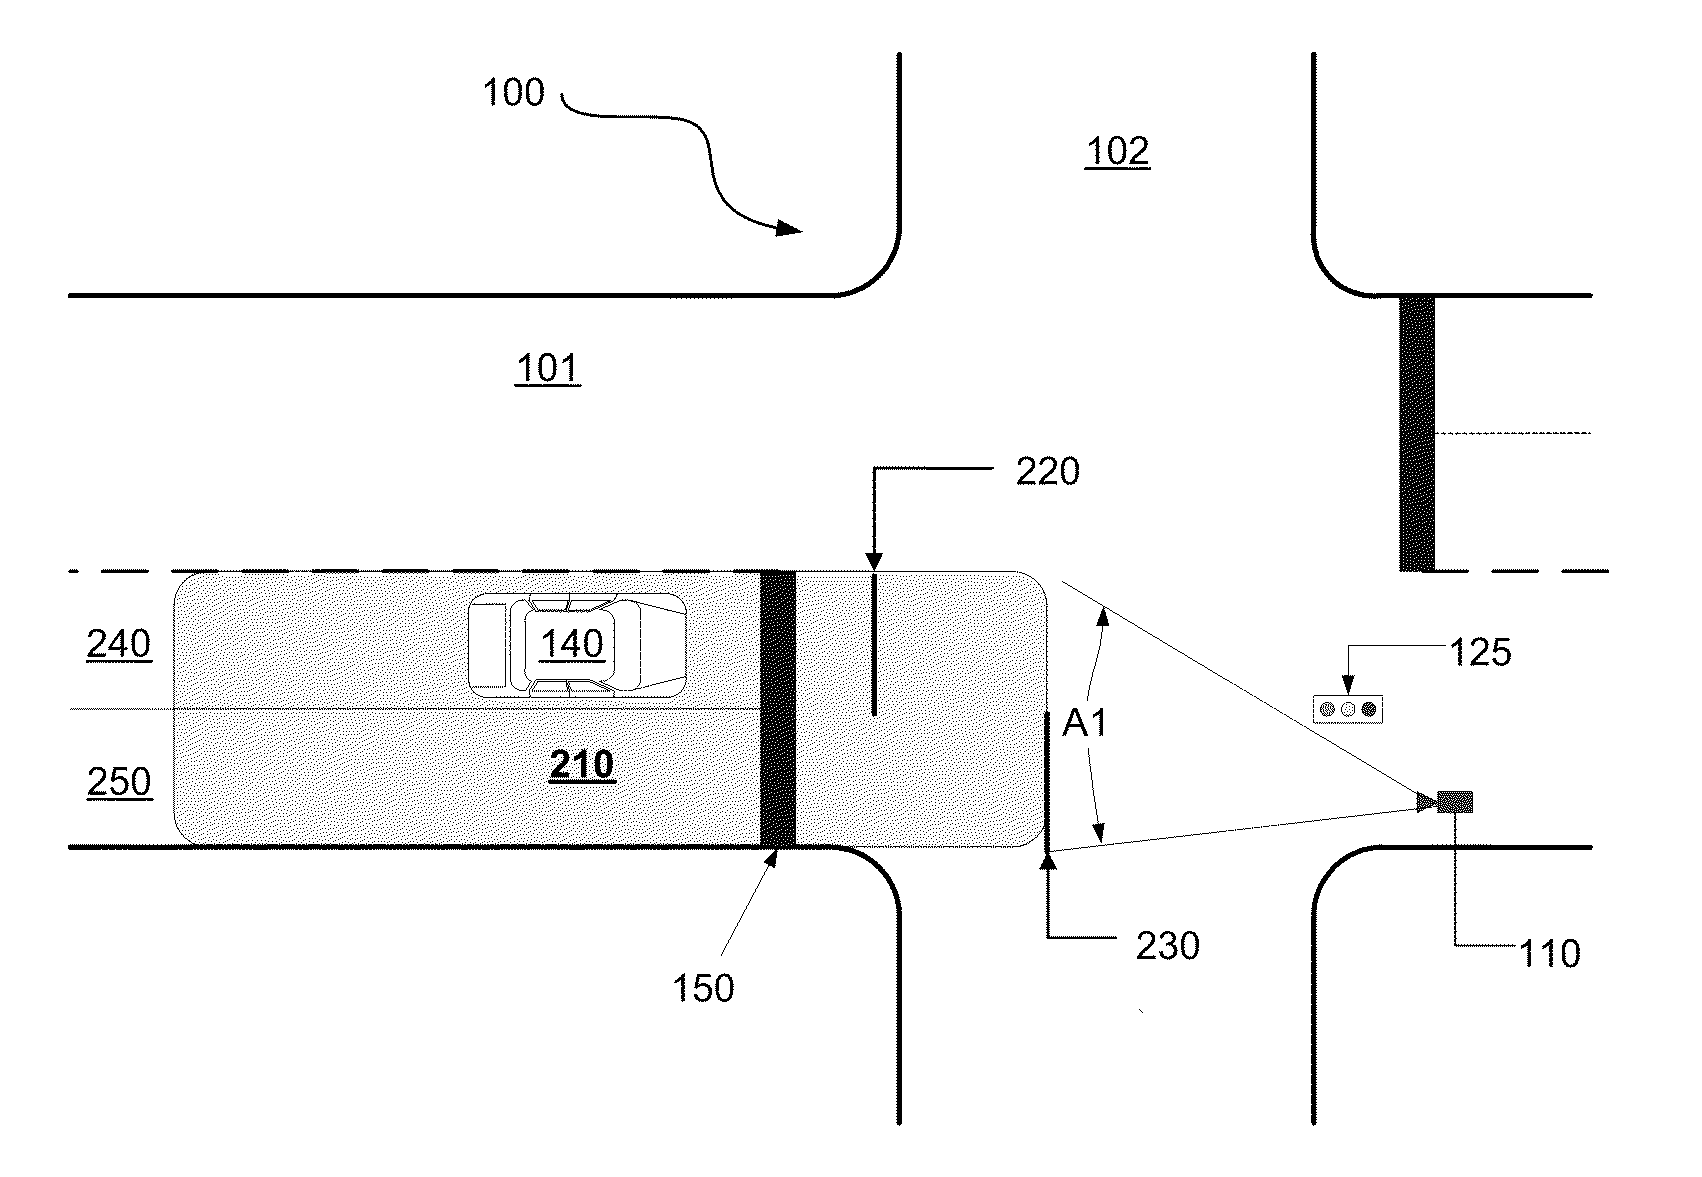 System and method for video signal sensing using traffic enforcement cameras